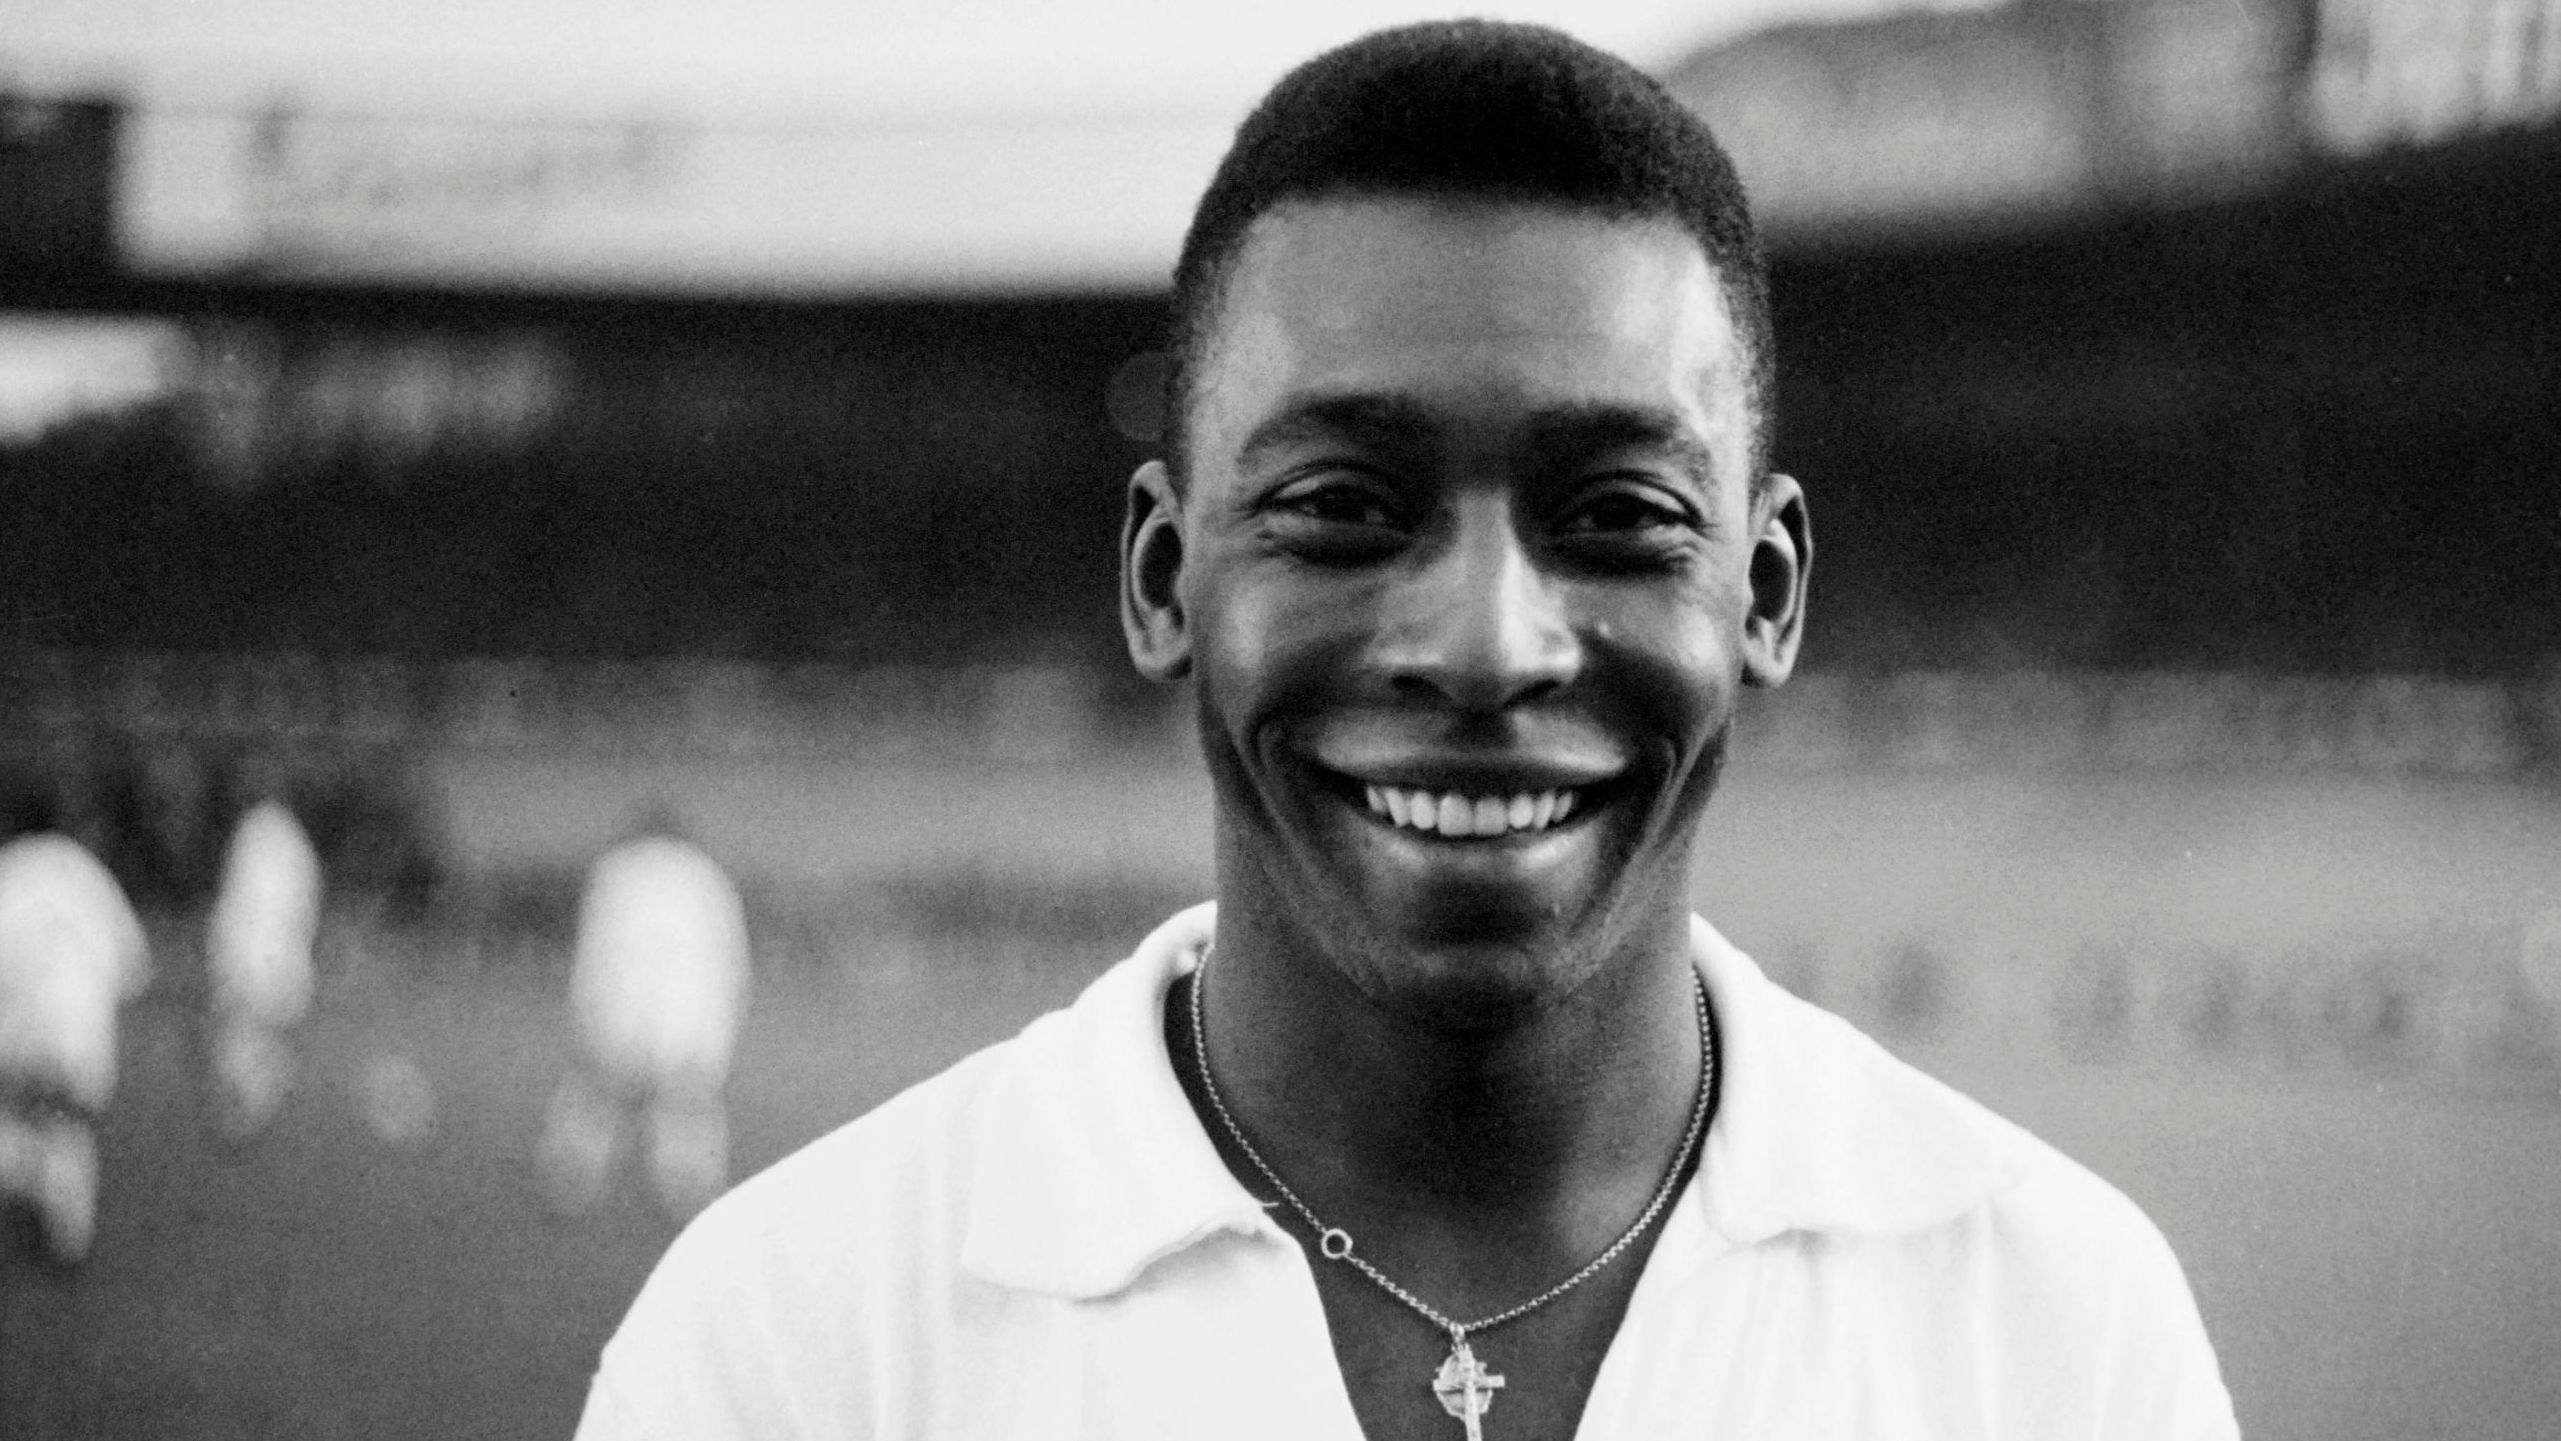 Pelé was born Edson Arantes do Nascimento on October 23, 1940. His parents named him after inventor Thomas Edison. <a href="https://www.theguardian.com/football/2006/may/13/sport.comment9" target="_blank" target="_blank">He got the nickname Pelé</a> when he was a young boy and had trouble pronouncing the name of his favorite player, a goalkeeper named Bilé who played with his father at a local club.